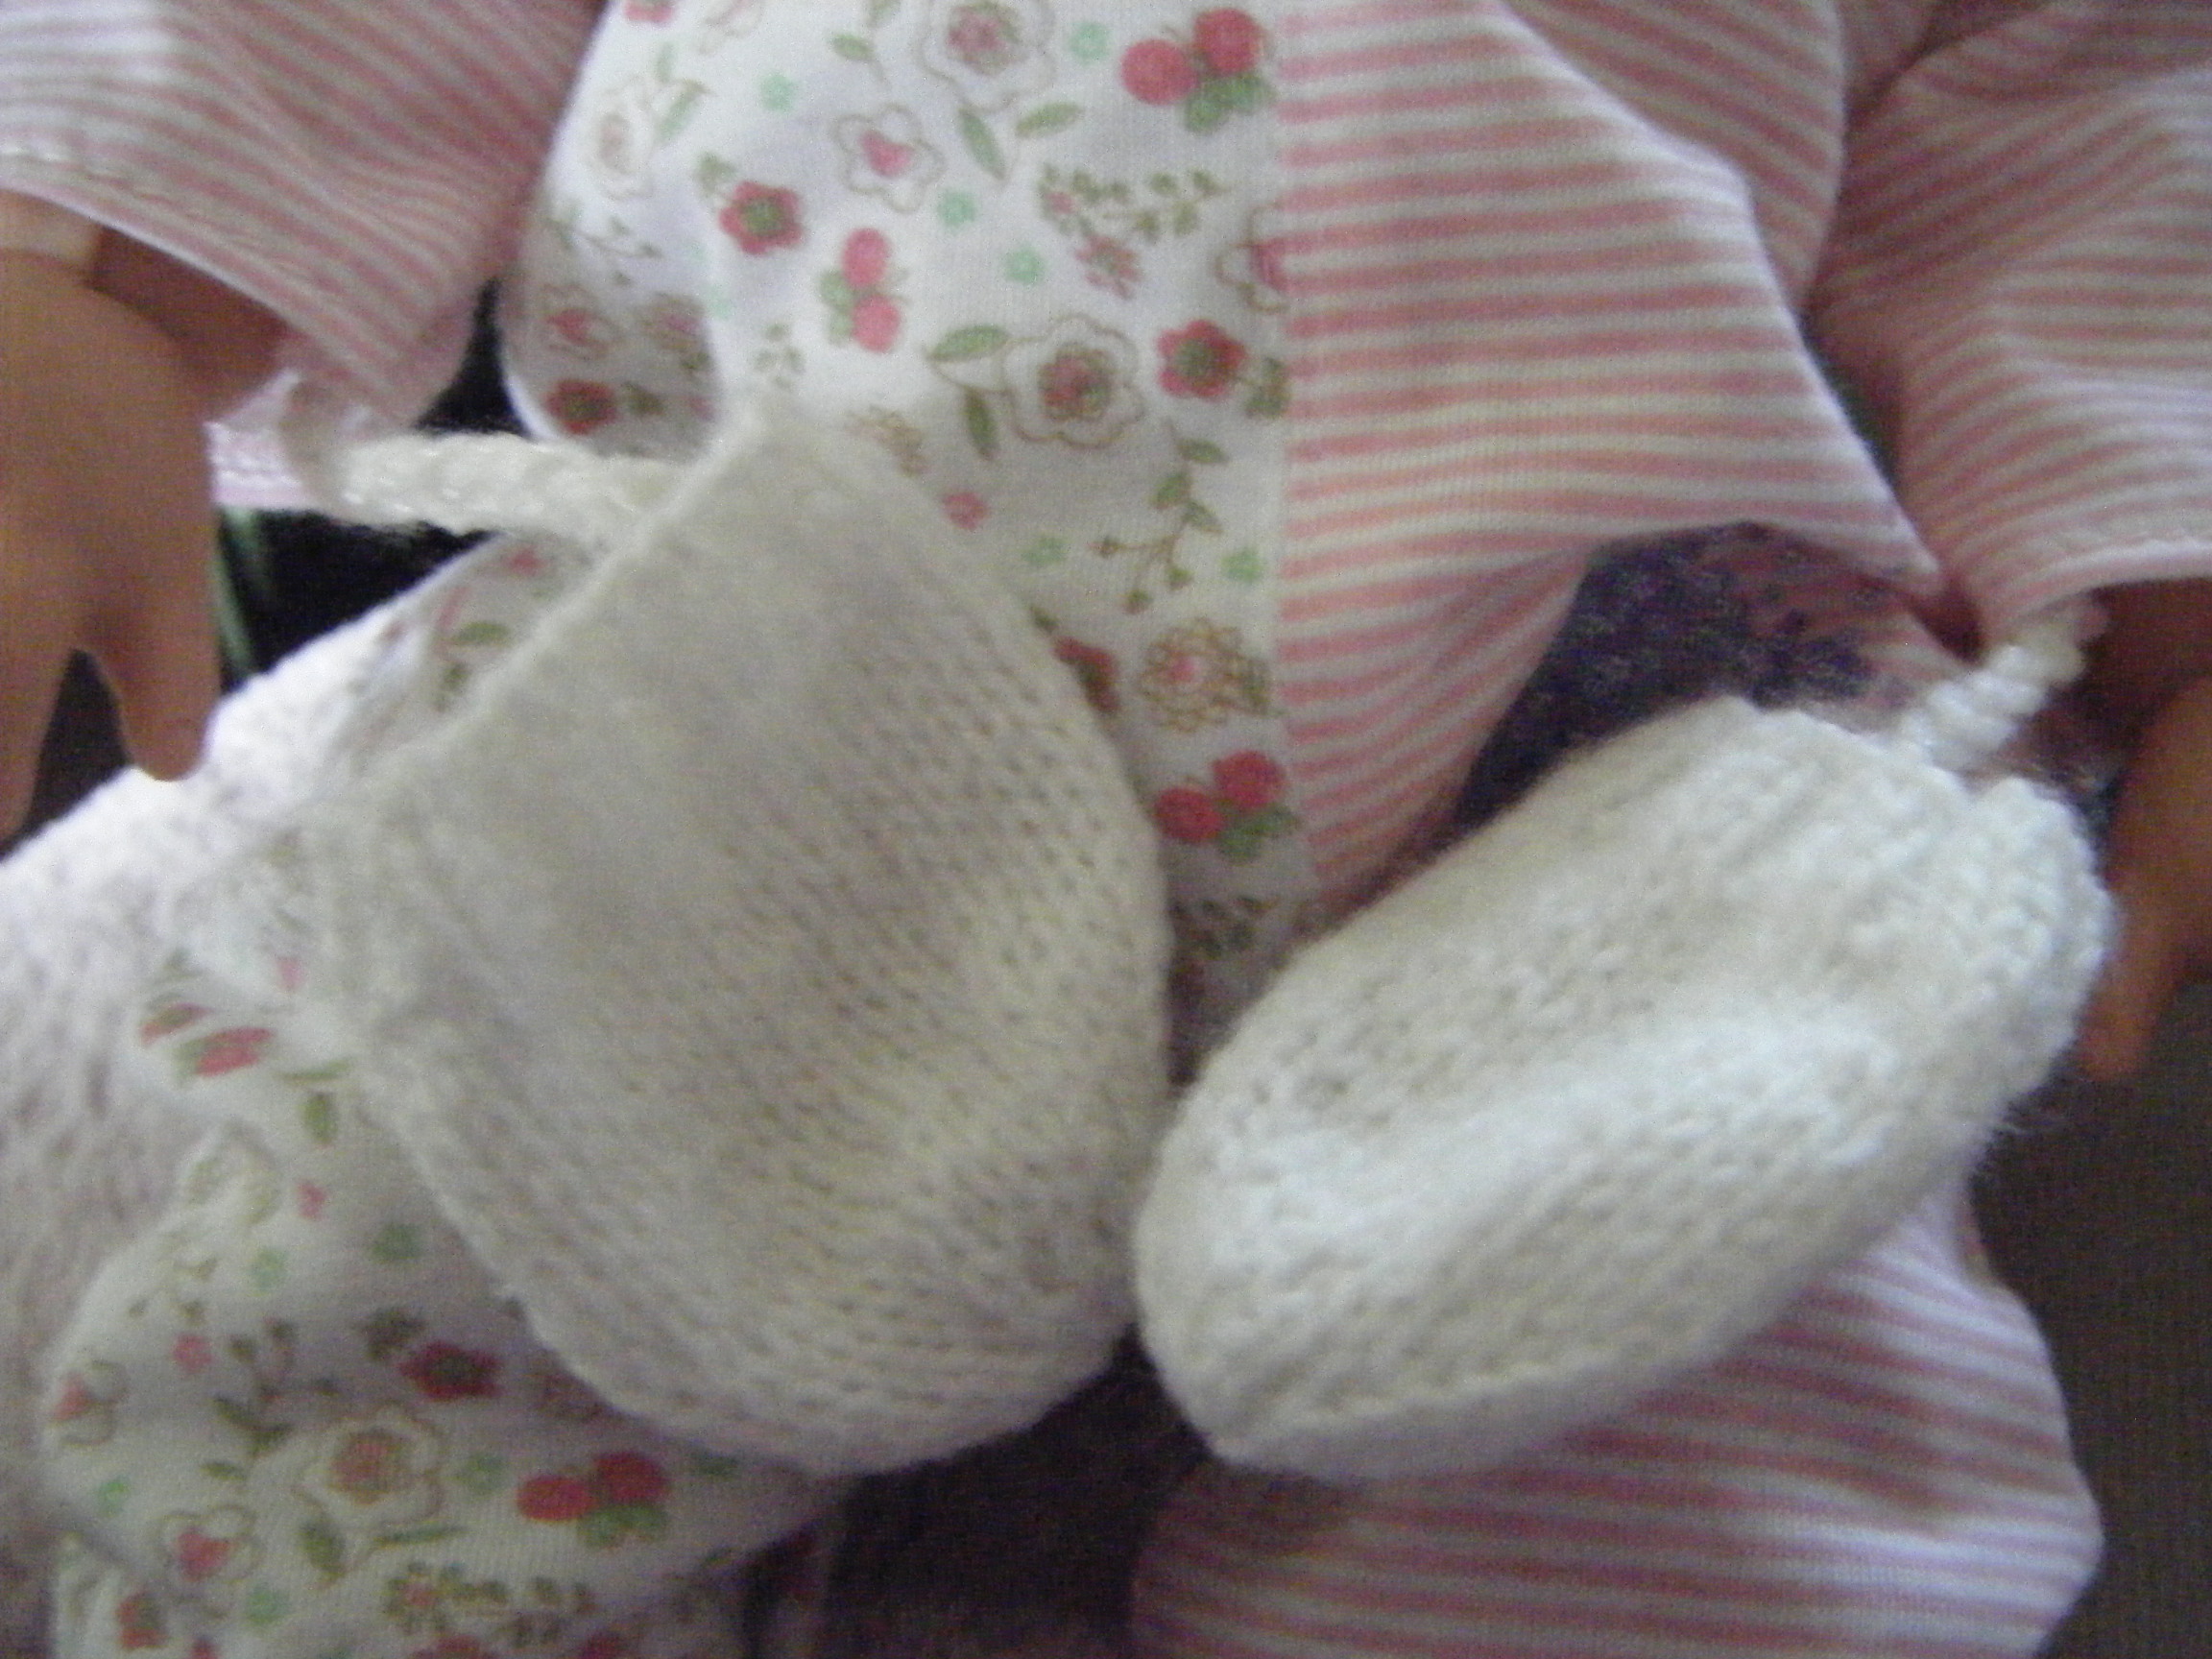 Ravelry: Baby Hand Socks pattern by Staci Perry